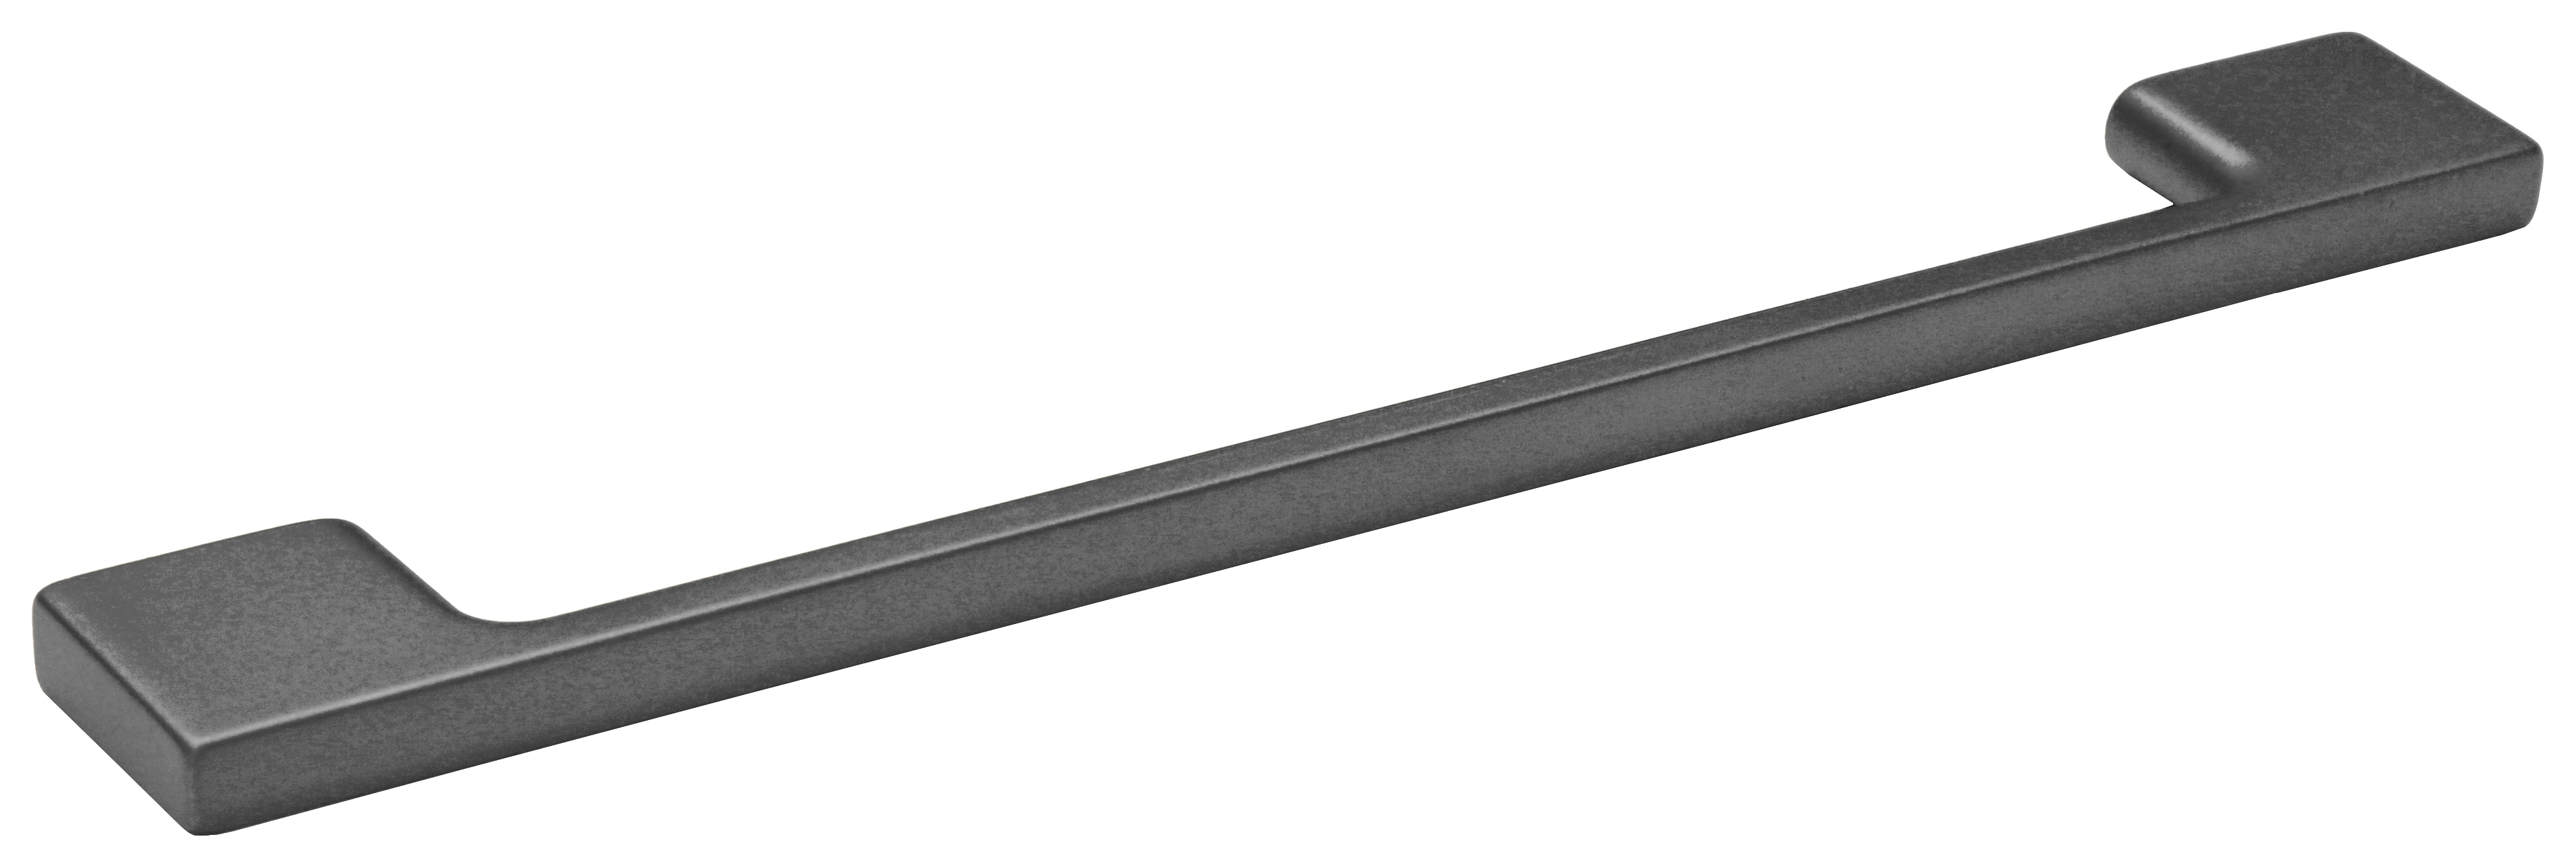 Image of Abacus Concept Shaker Matt Anthracite Bathroom Furniture Handle - Pack of 1